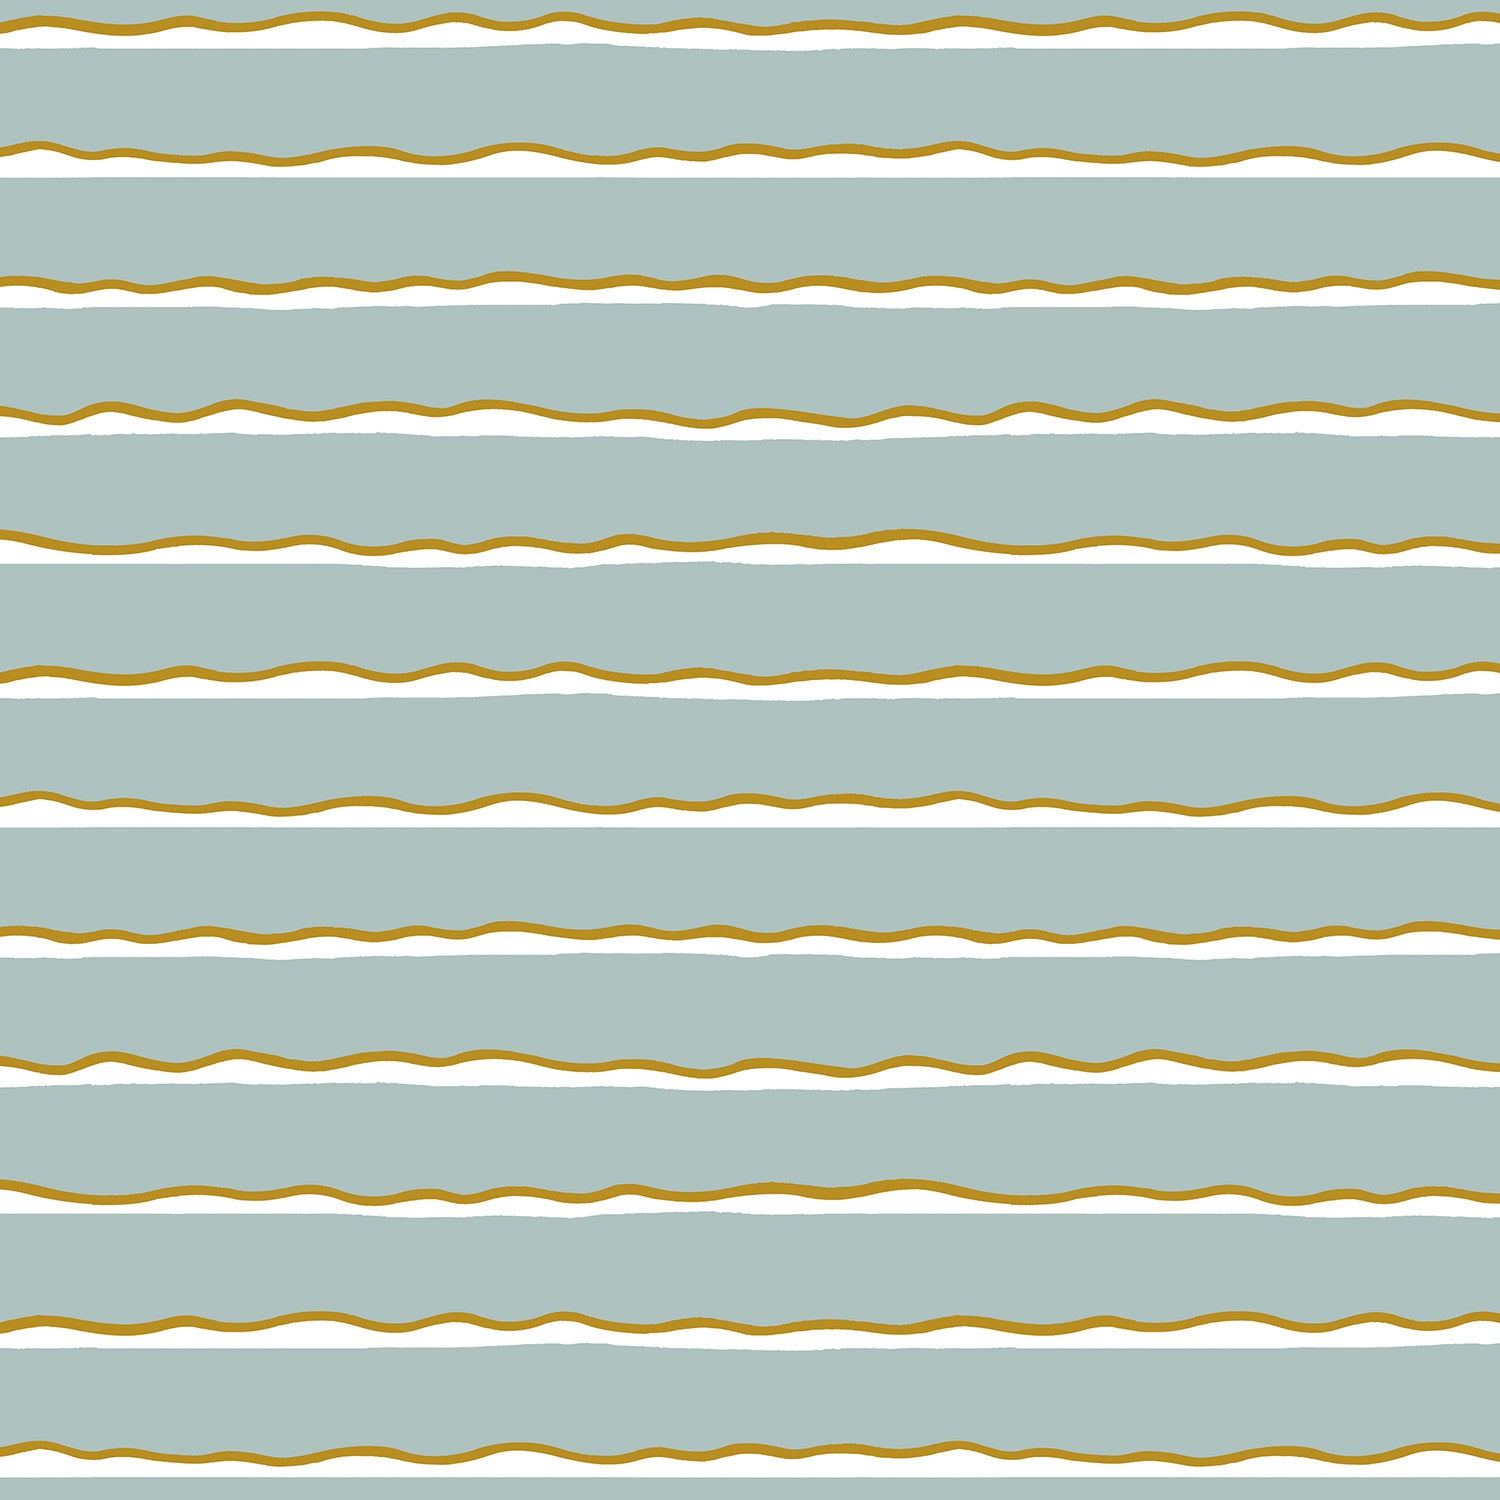 Detail of wallpaper in an undulating stripe pattern in gold, white and blue-gray.